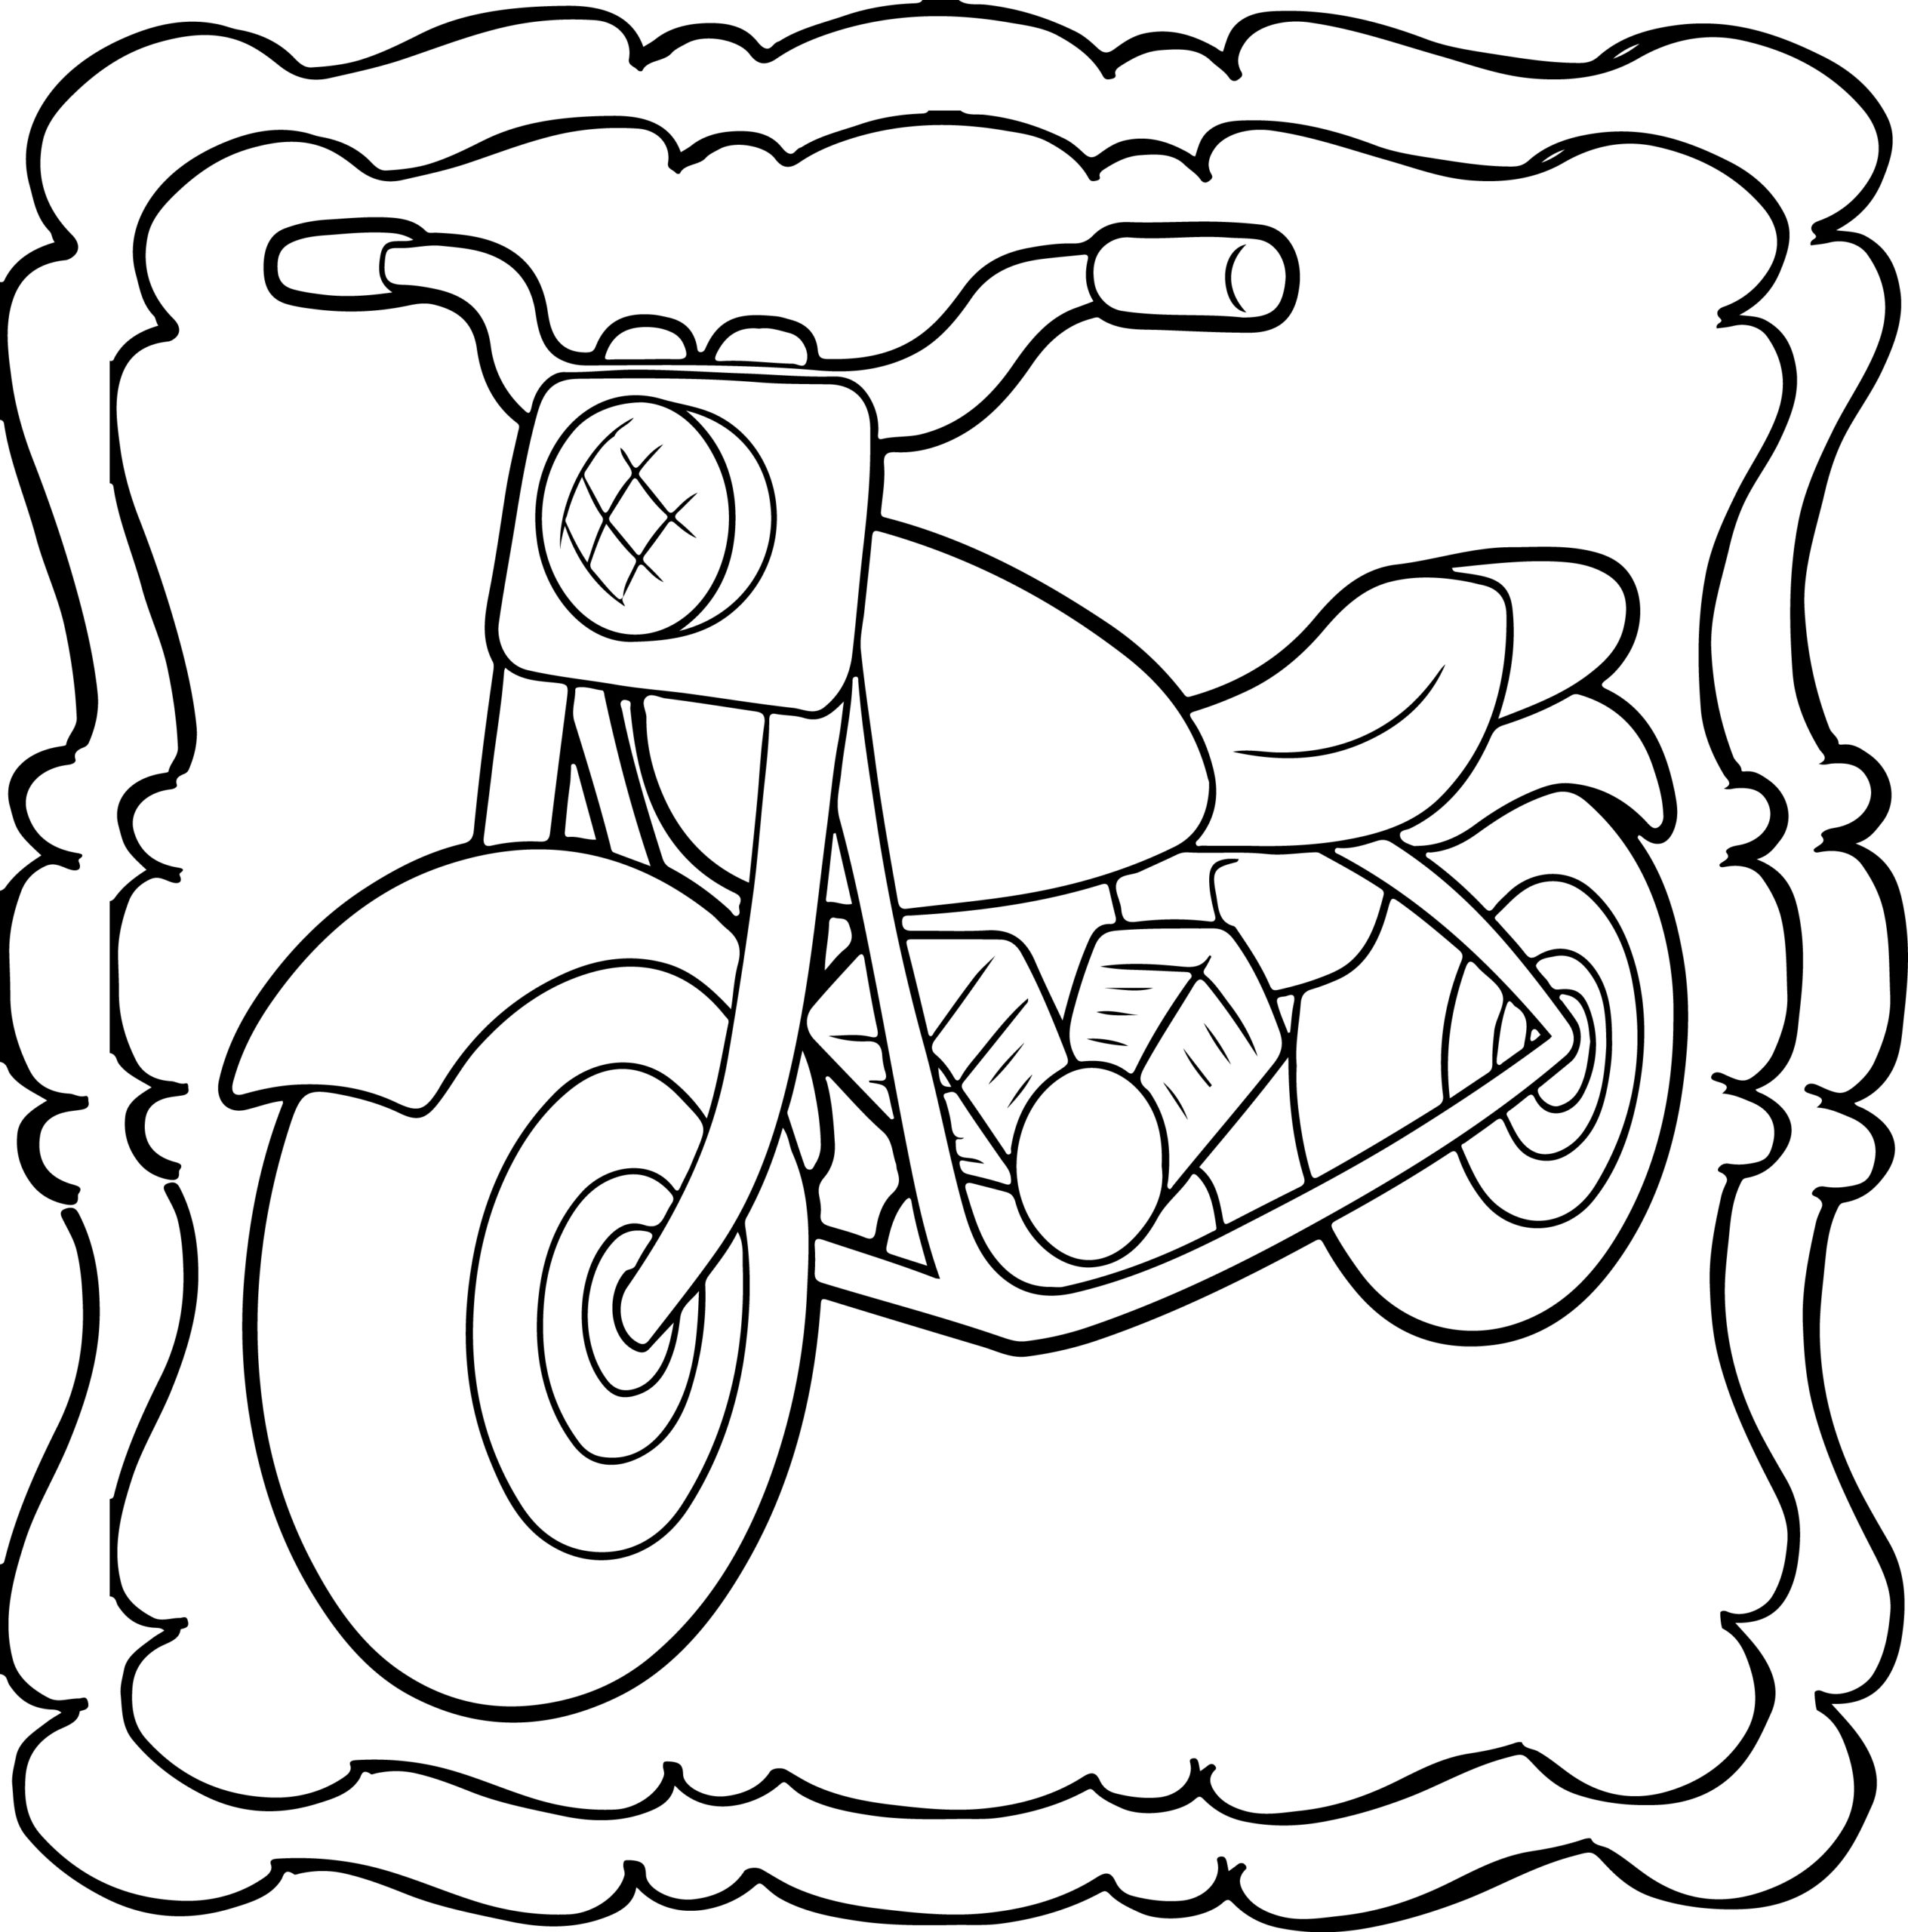 Motorcycle coloring book easy and fun motorcycles coloring book for kids made by teachers